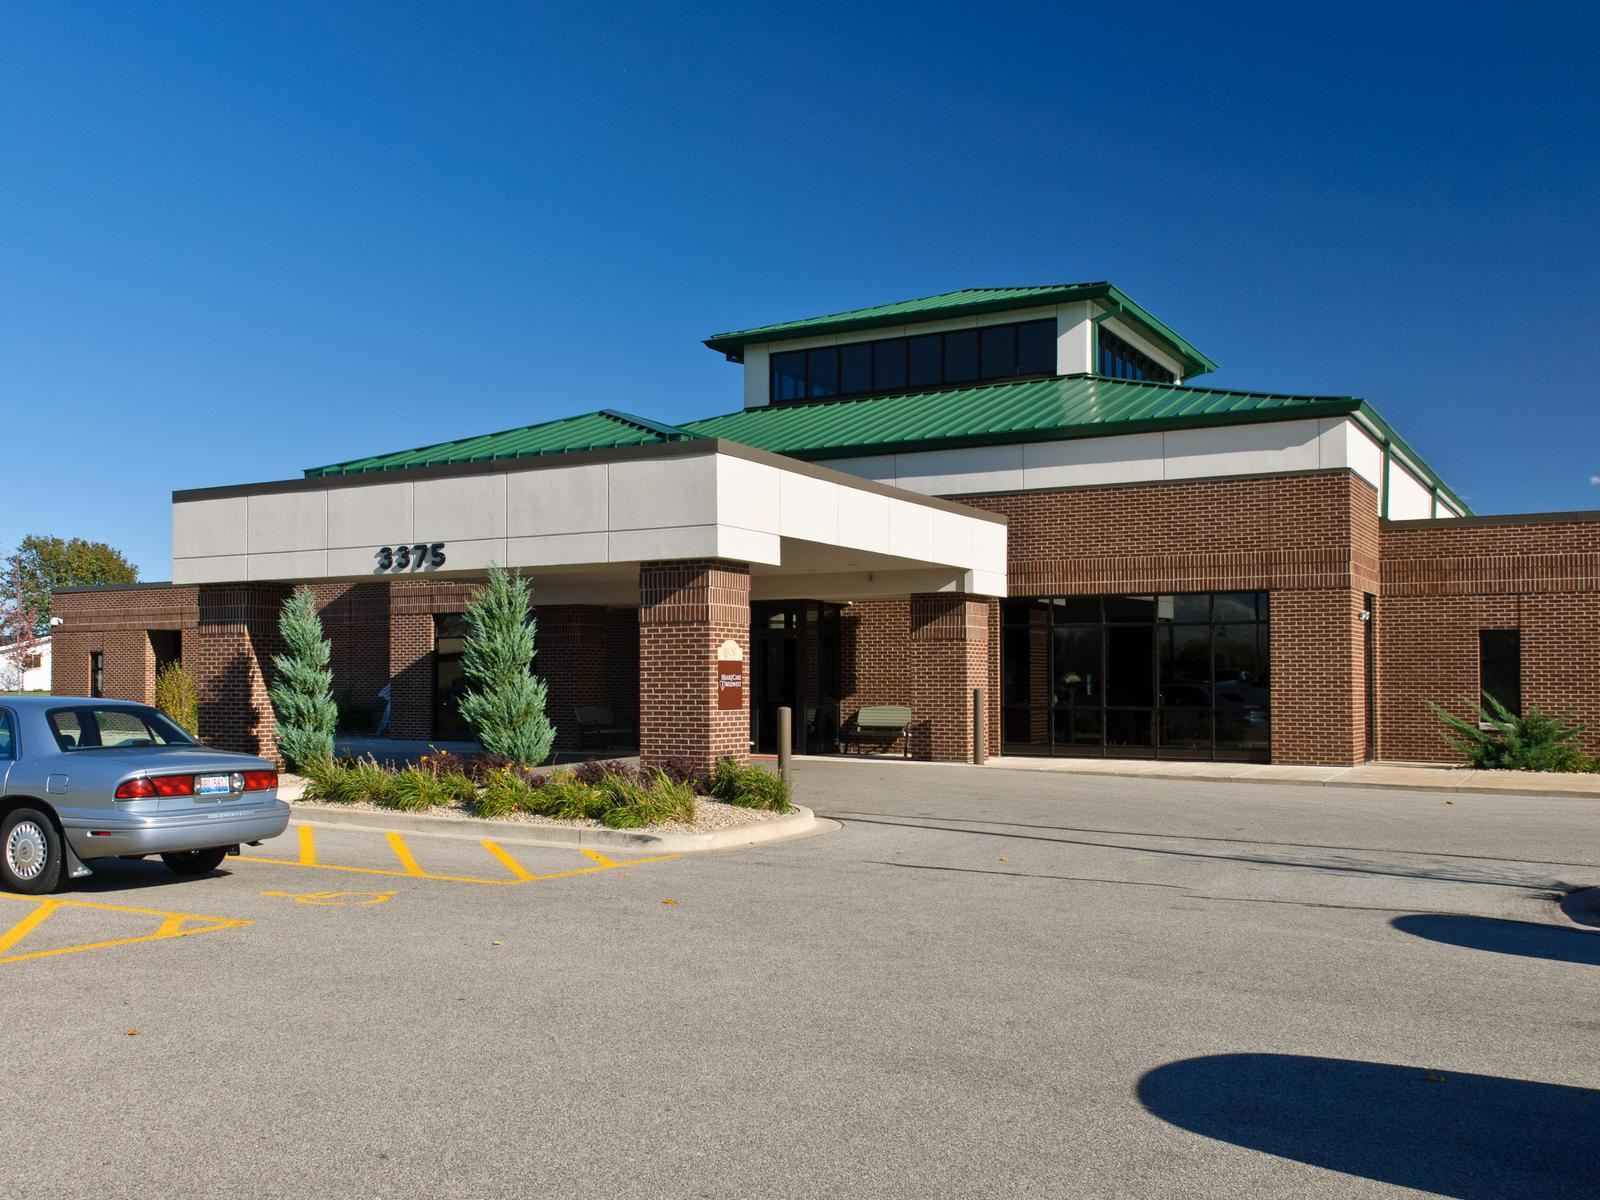 OSF Medical Group - Primary Care, 3375 N. Seminary Street, Galesburg, Illinois, 61401